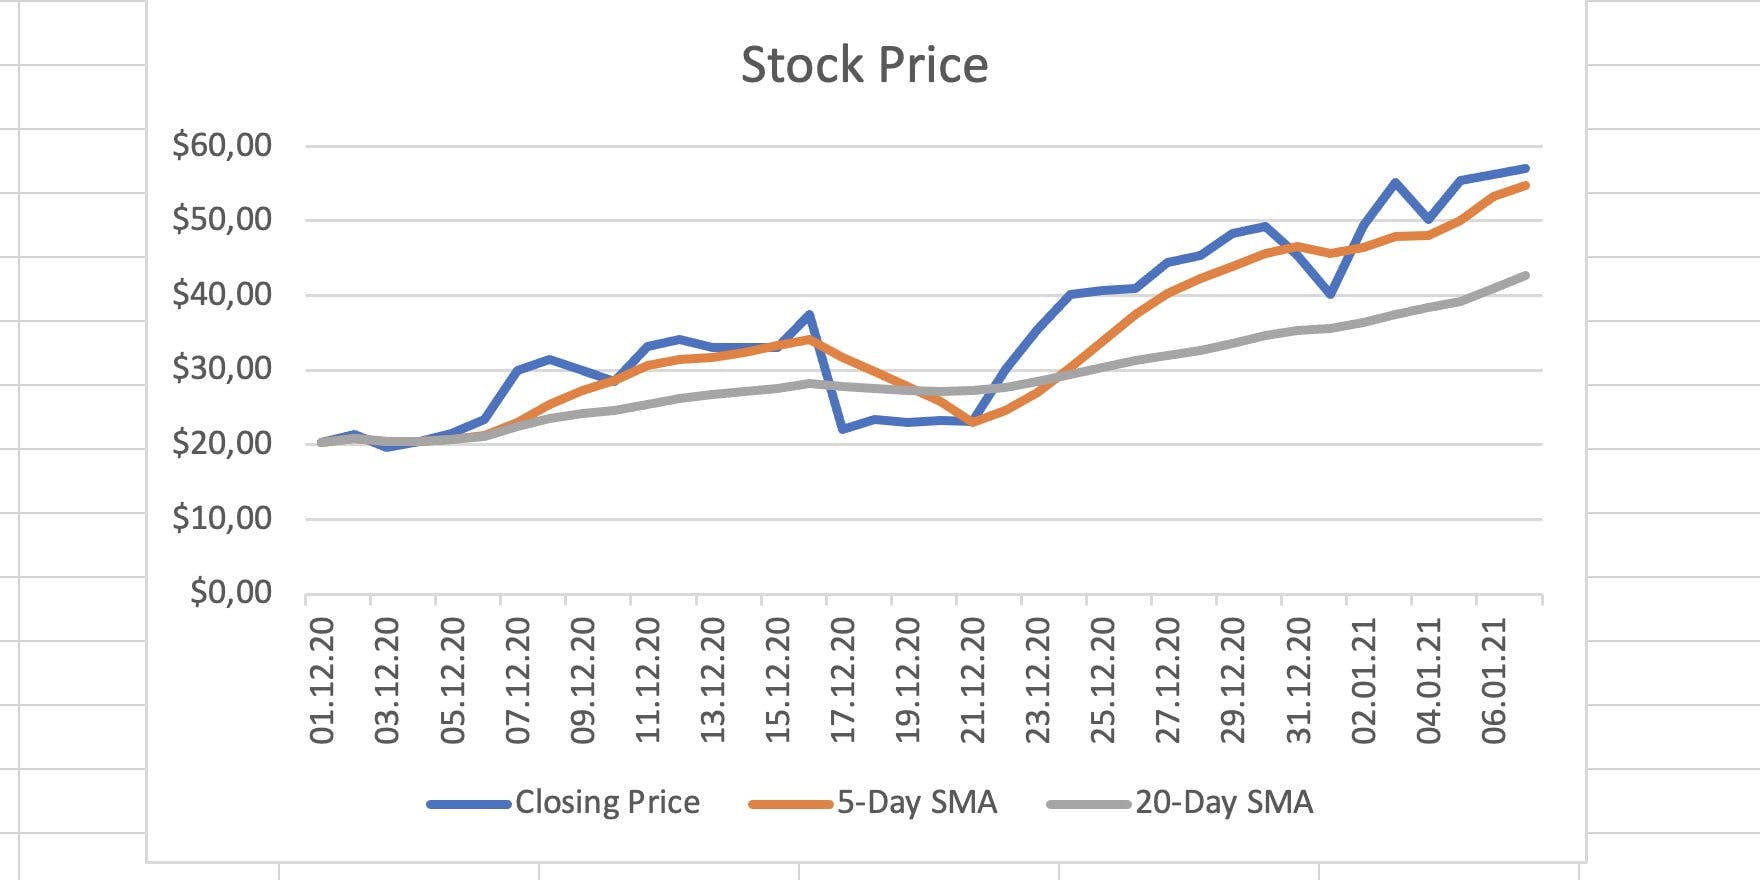 The chart also shows a 20-Day SMA now.